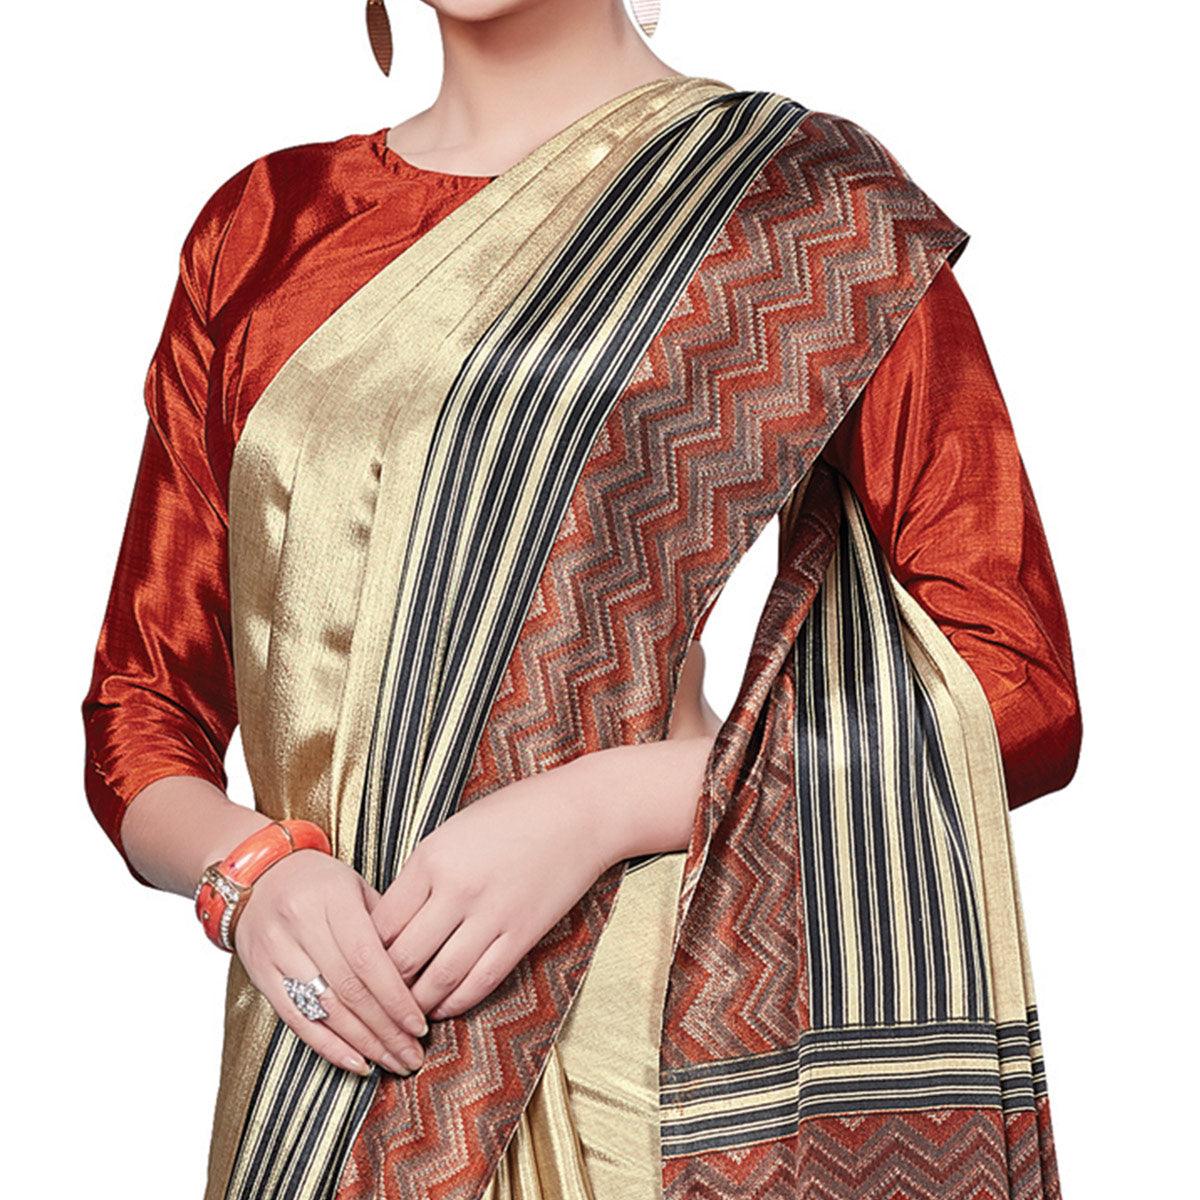 Lovely Beige Colored Casual Wear Printed Crepe Saree - Peachmode